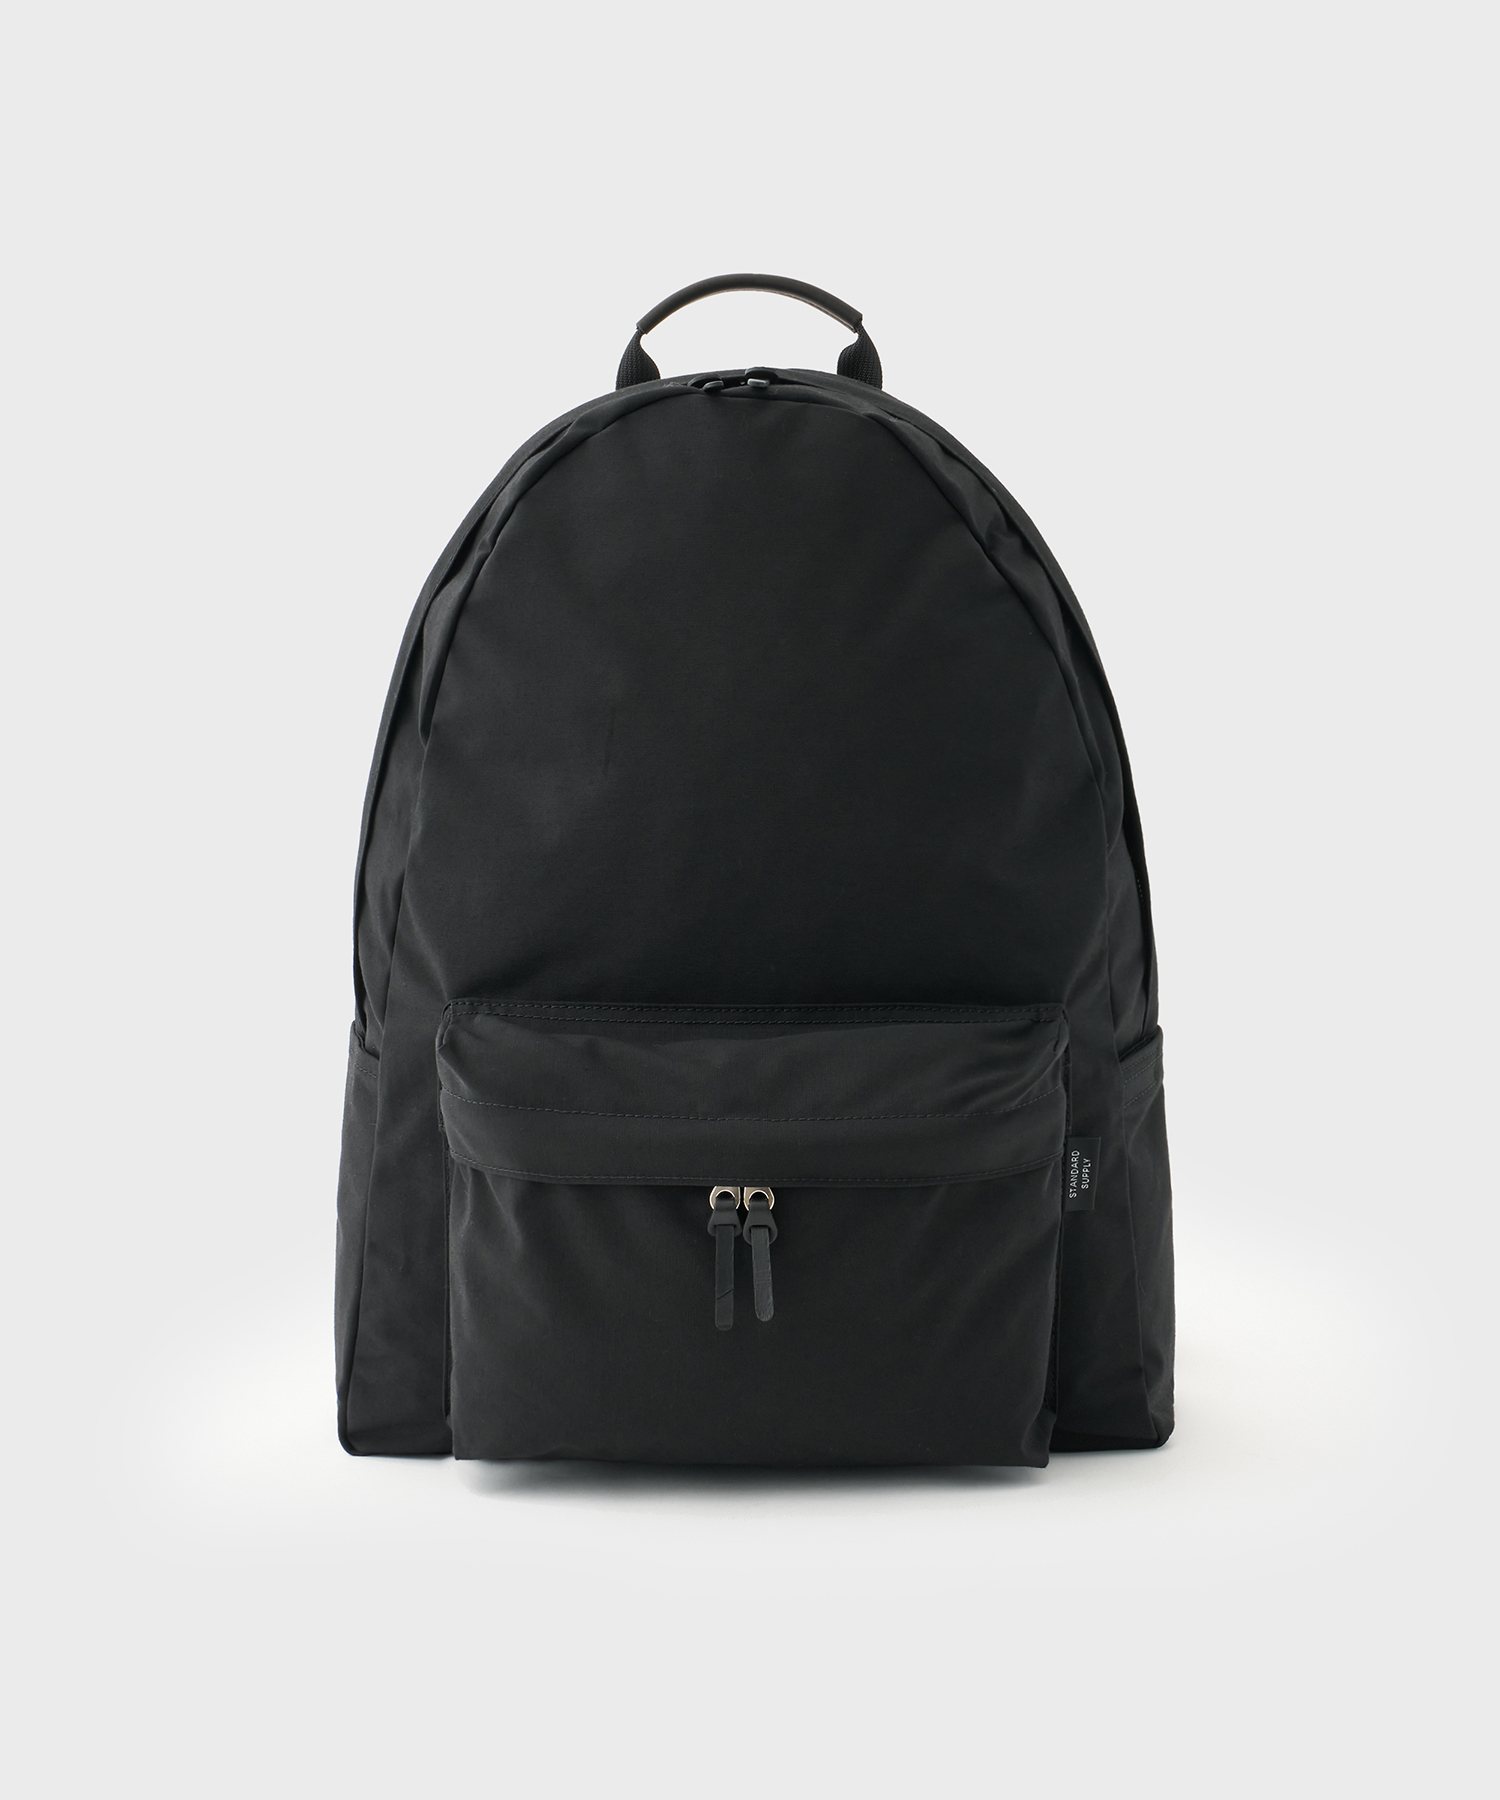 Simplictity Daily Daypack (Black)